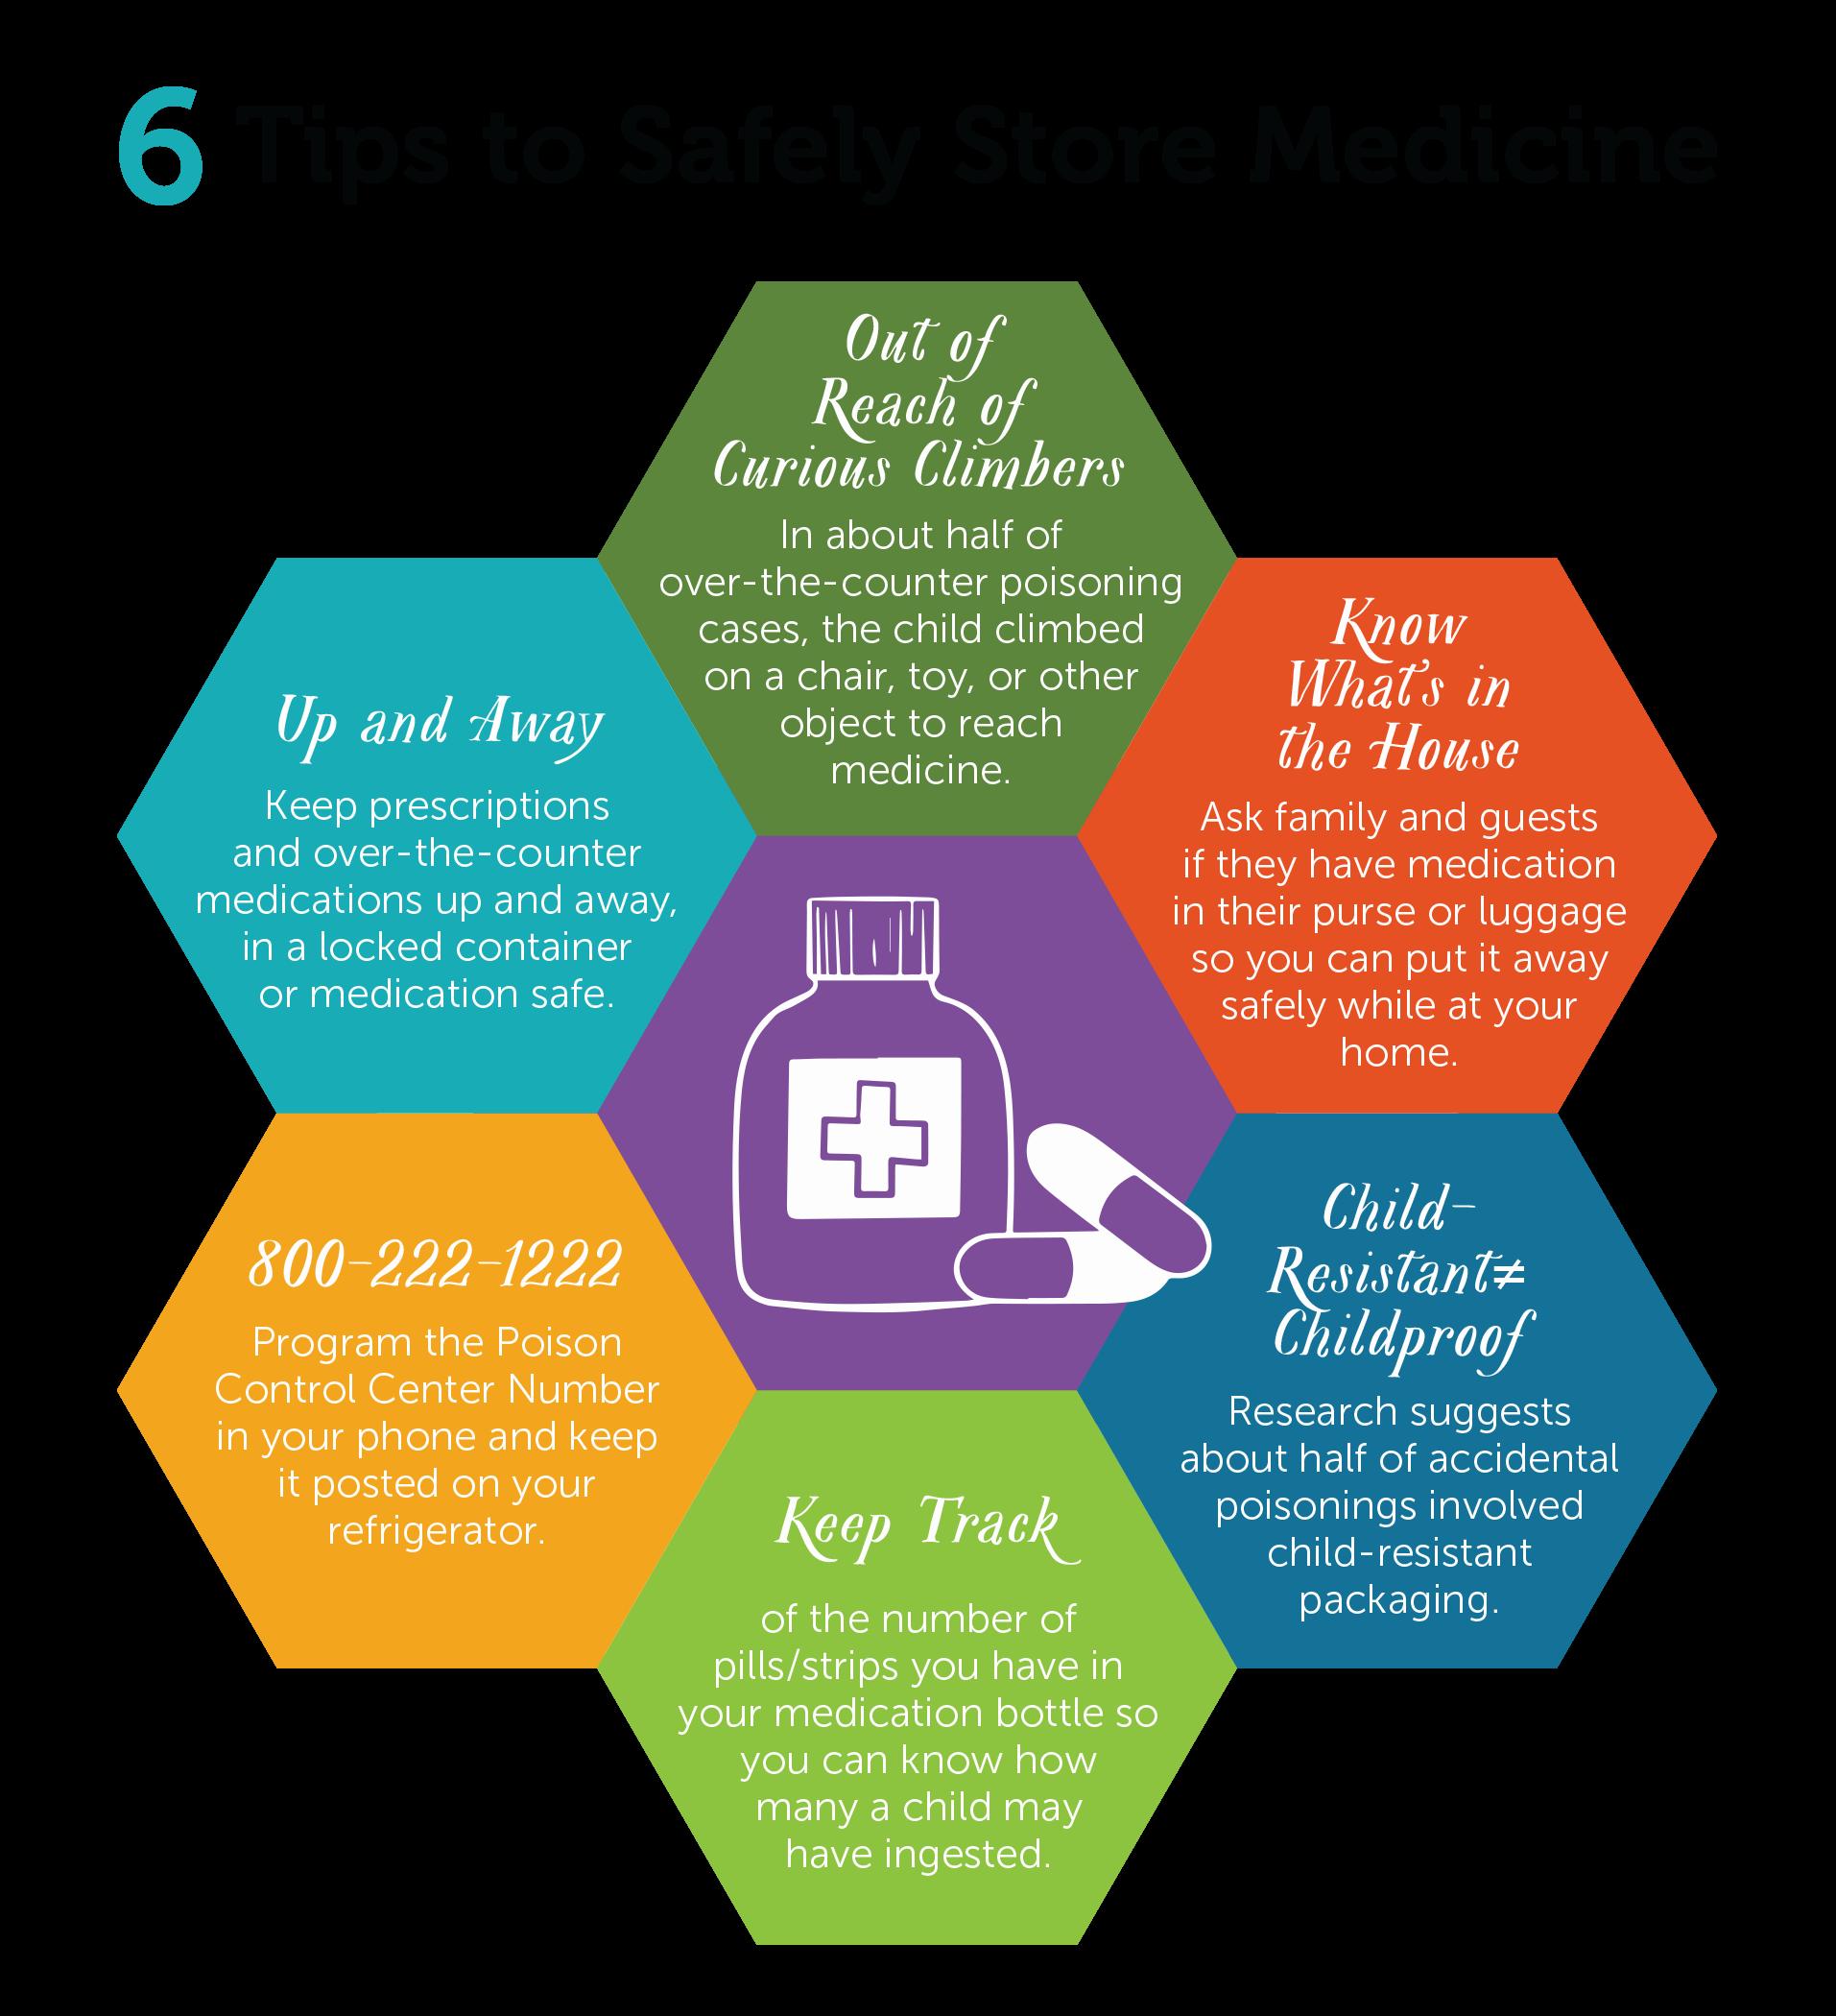 A poster with 6 tips for safely storing medicine, including keeping it up and away from children, out of reach of curious climbers, knowing whats in the house, programming the Poison Control Center Number into your phone, keeping track of the number of pills in a medication bottle, and using child-resistant packaging.